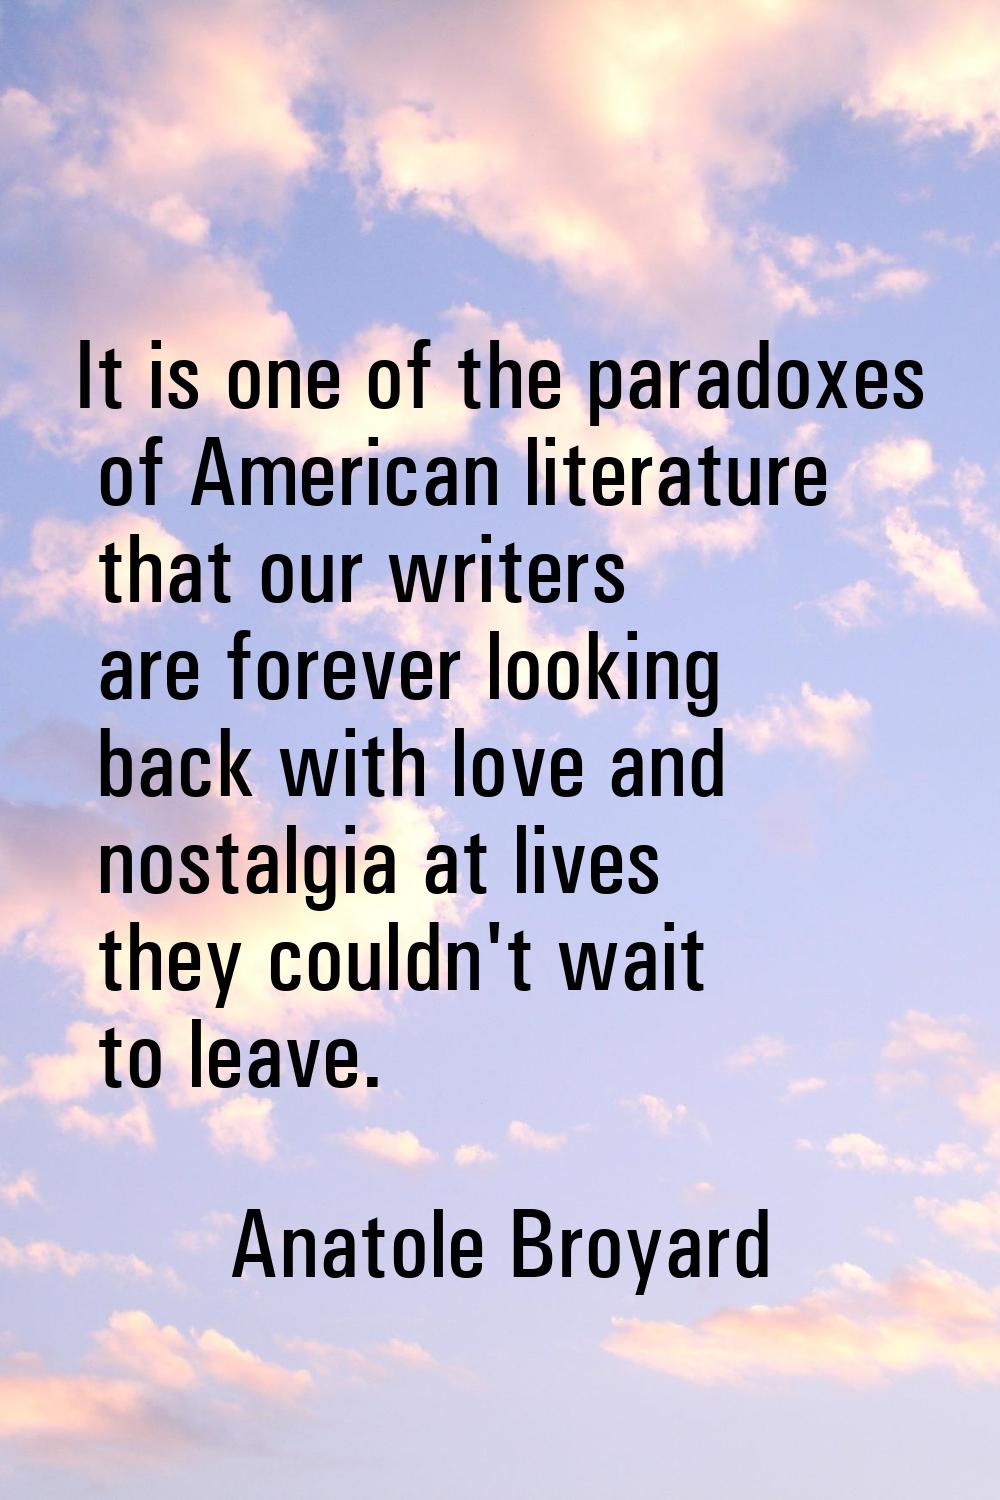 It is one of the paradoxes of American literature that our writers are forever looking back with lo